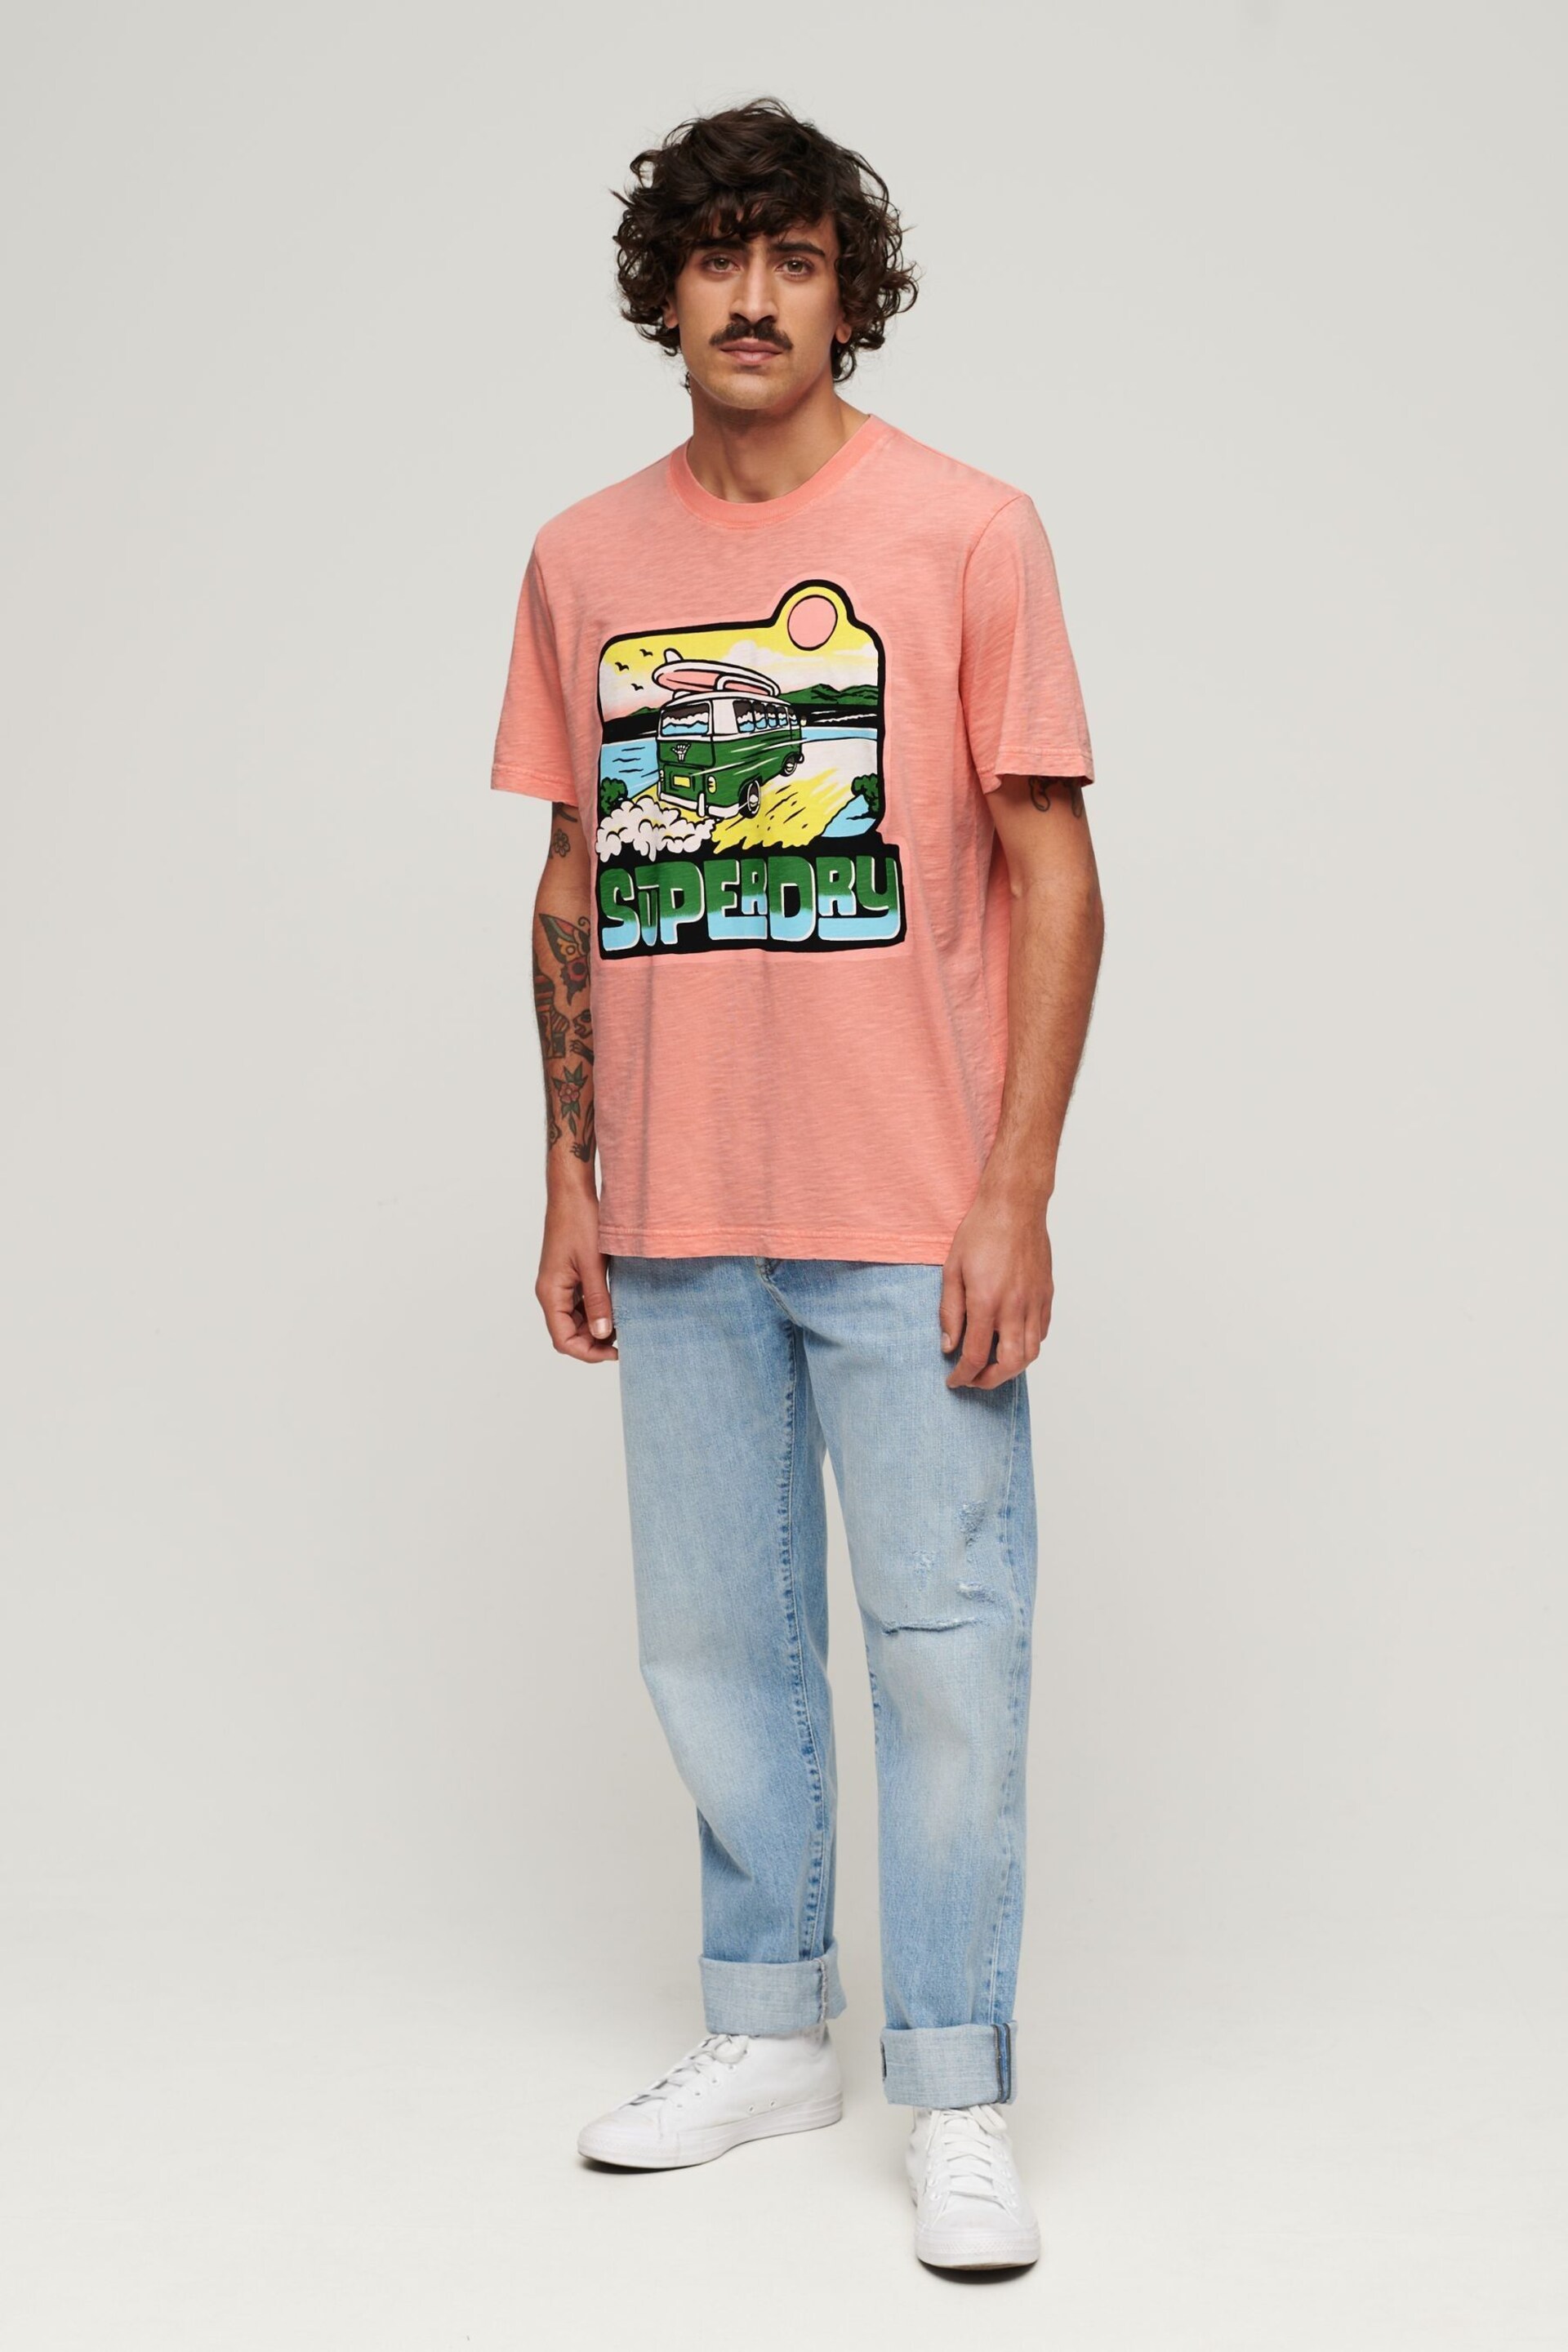 Superdry Pink Travel Graphic Loose T-Shirt - Image 2 of 5